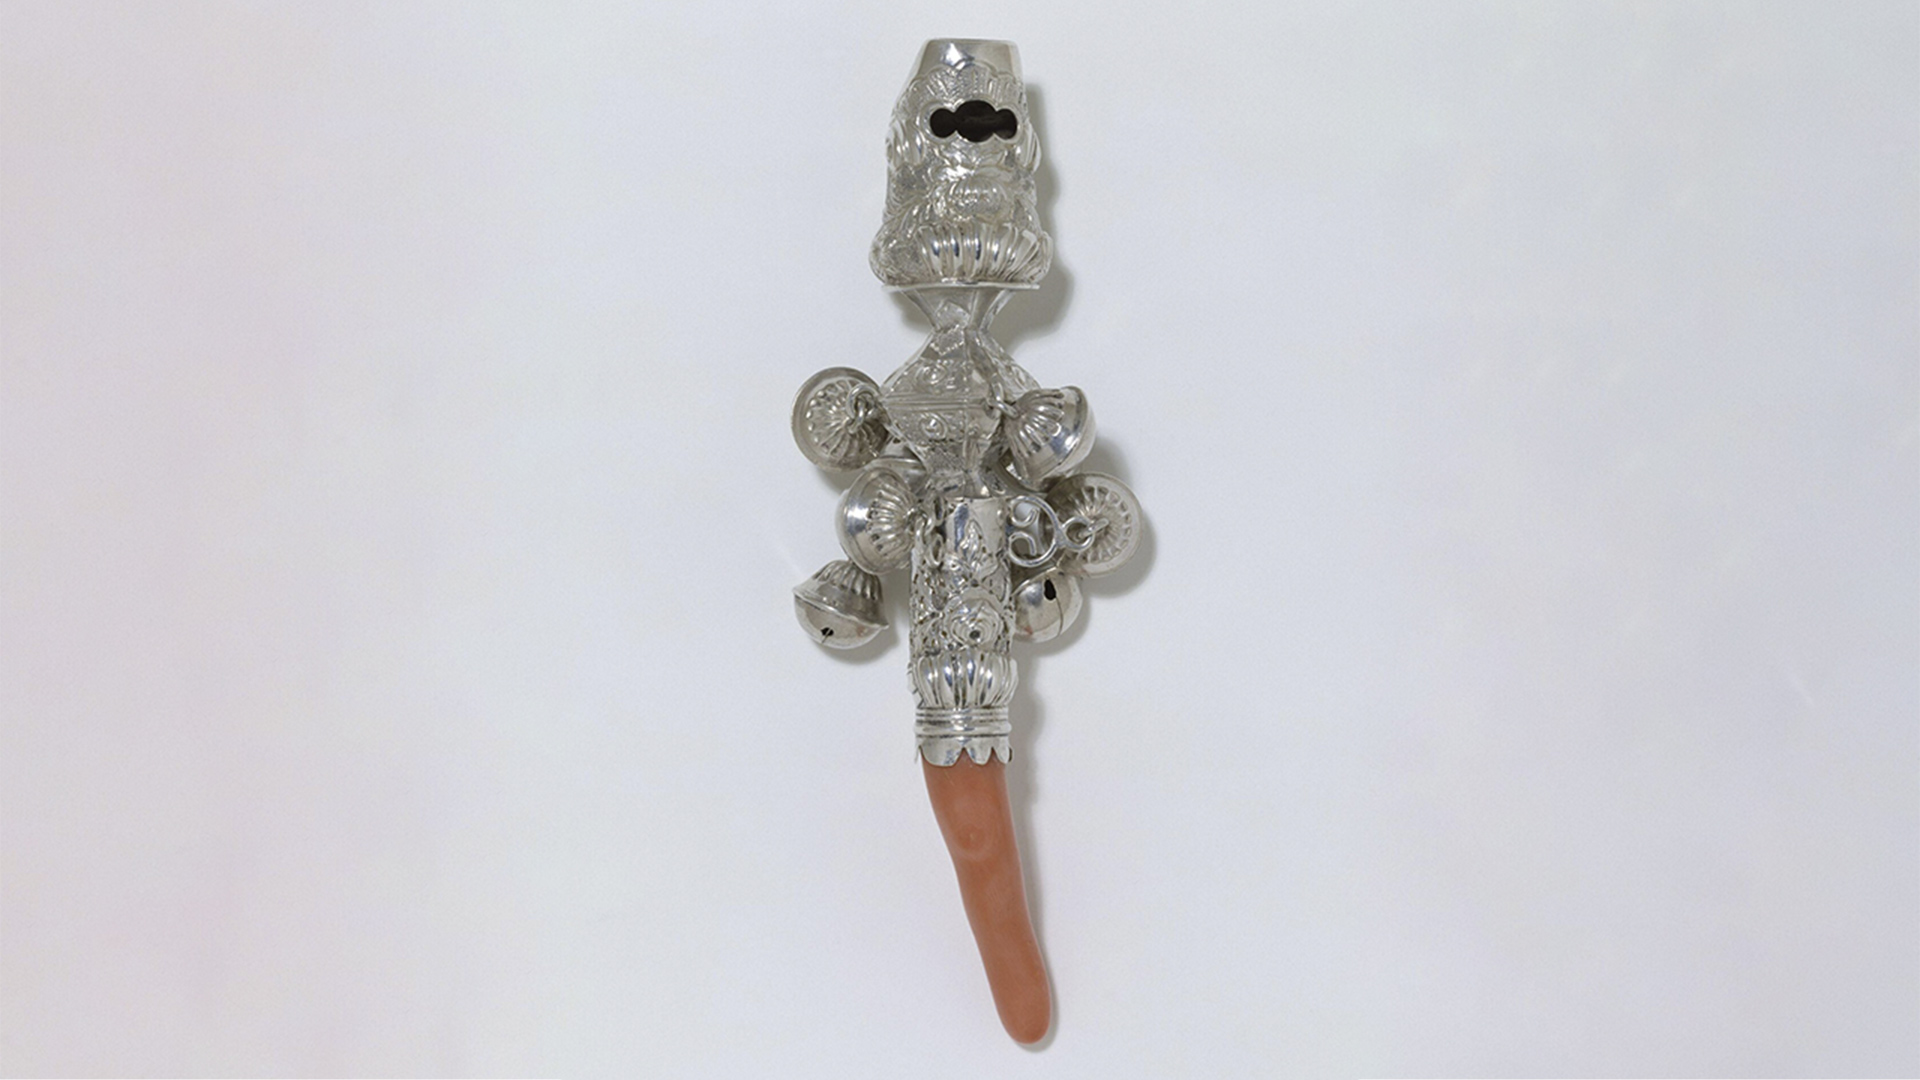 Silver and coral object with bells